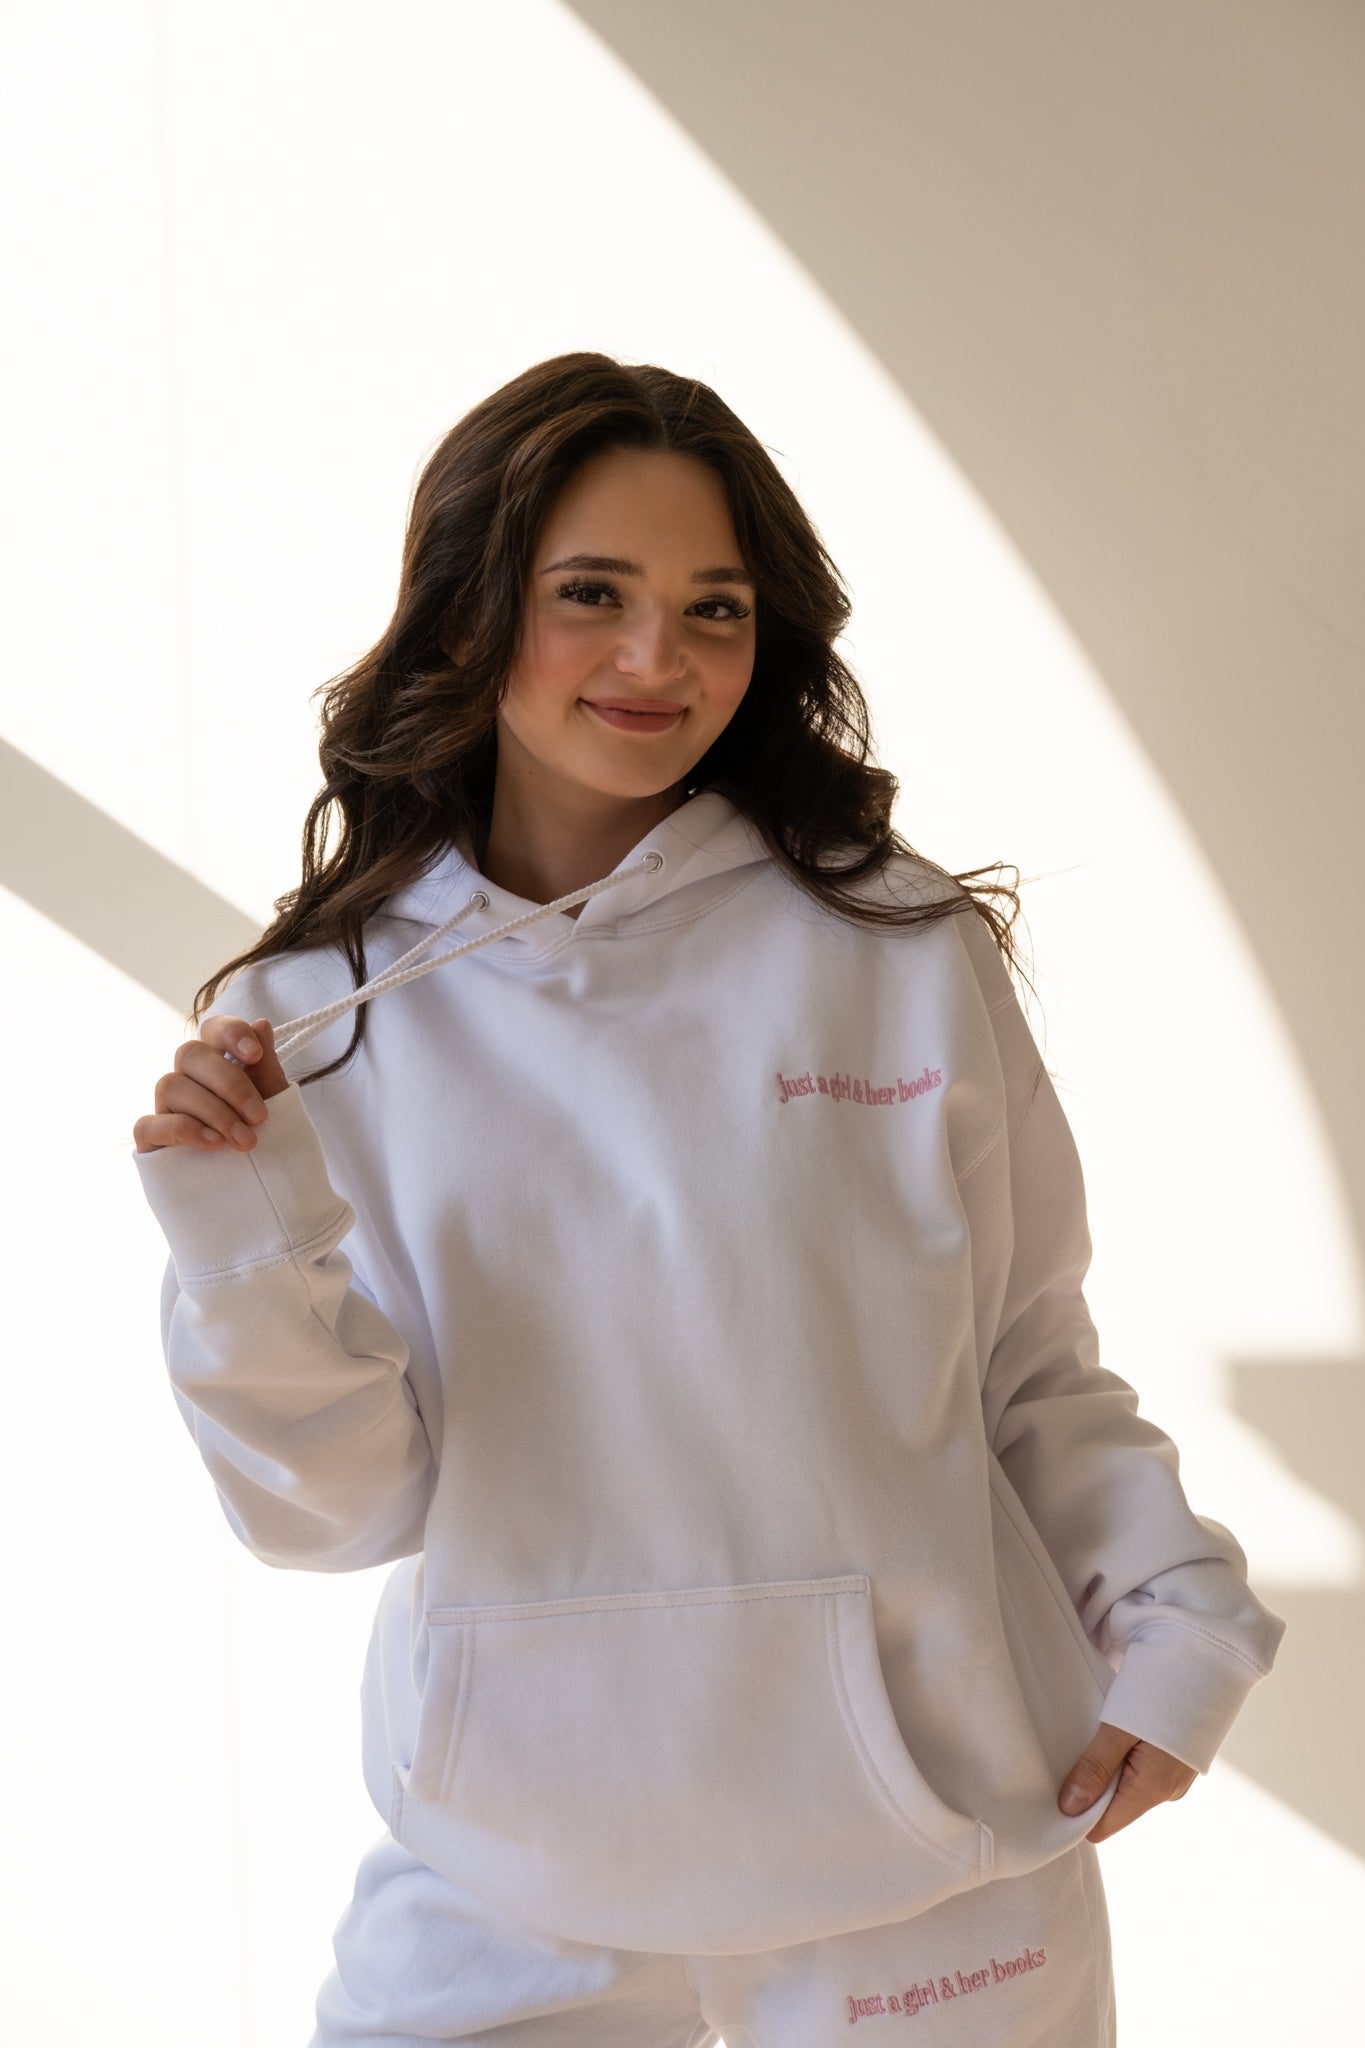 Book lover Alexa in a cozy white just a girl & her books hoodie